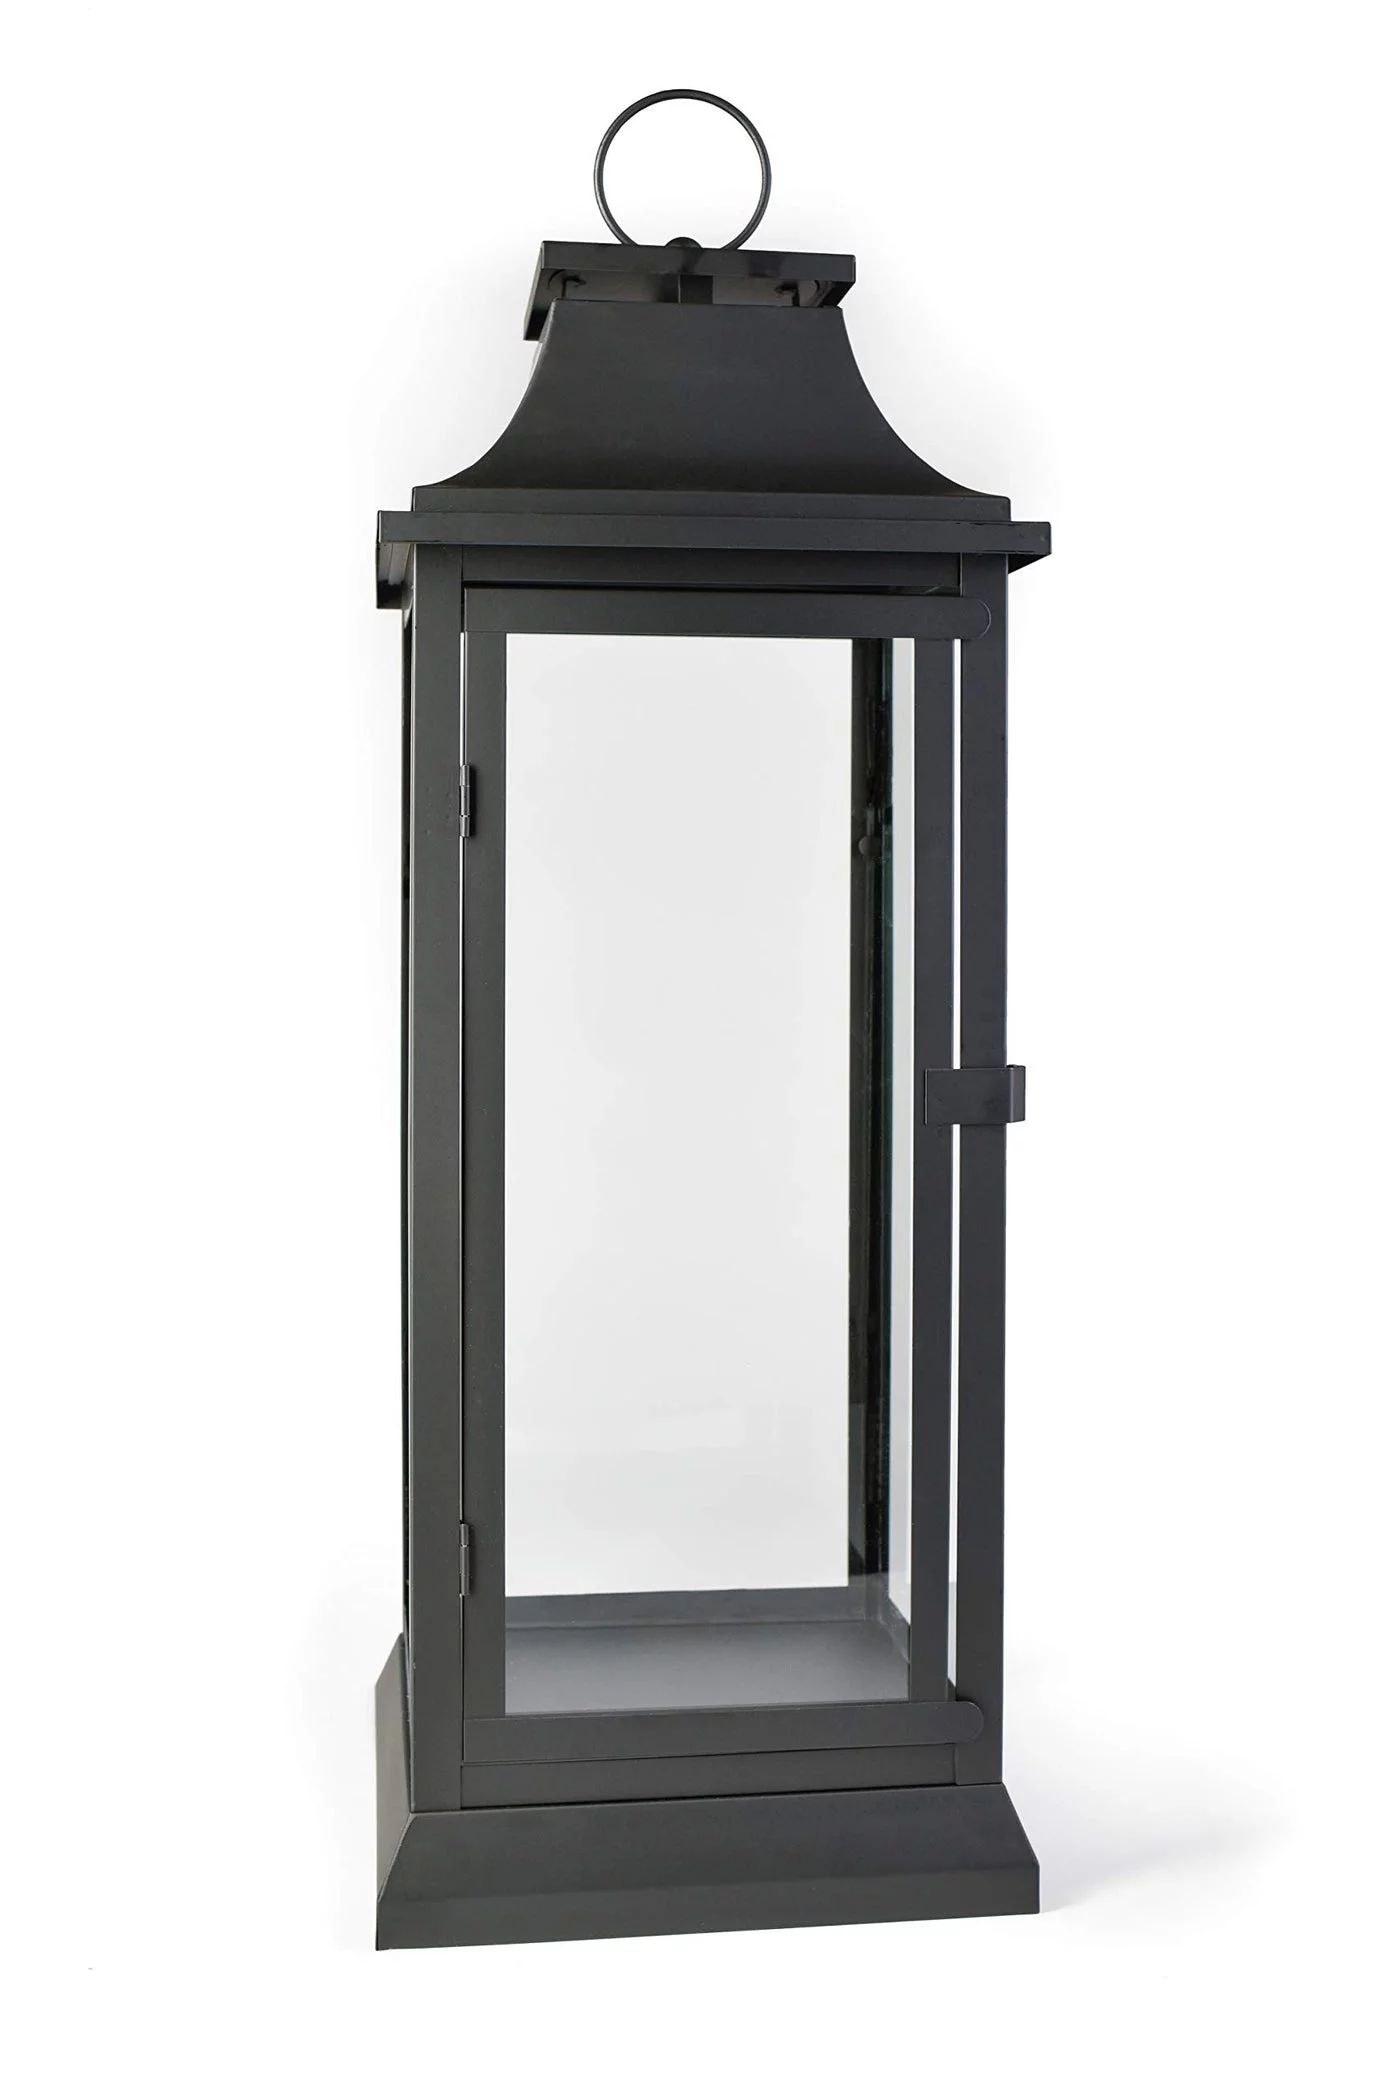 Serene Spaces Living Black Hurricane Lanterns with Clear Glass Panels, Home Decor, Large | Walmart (US)